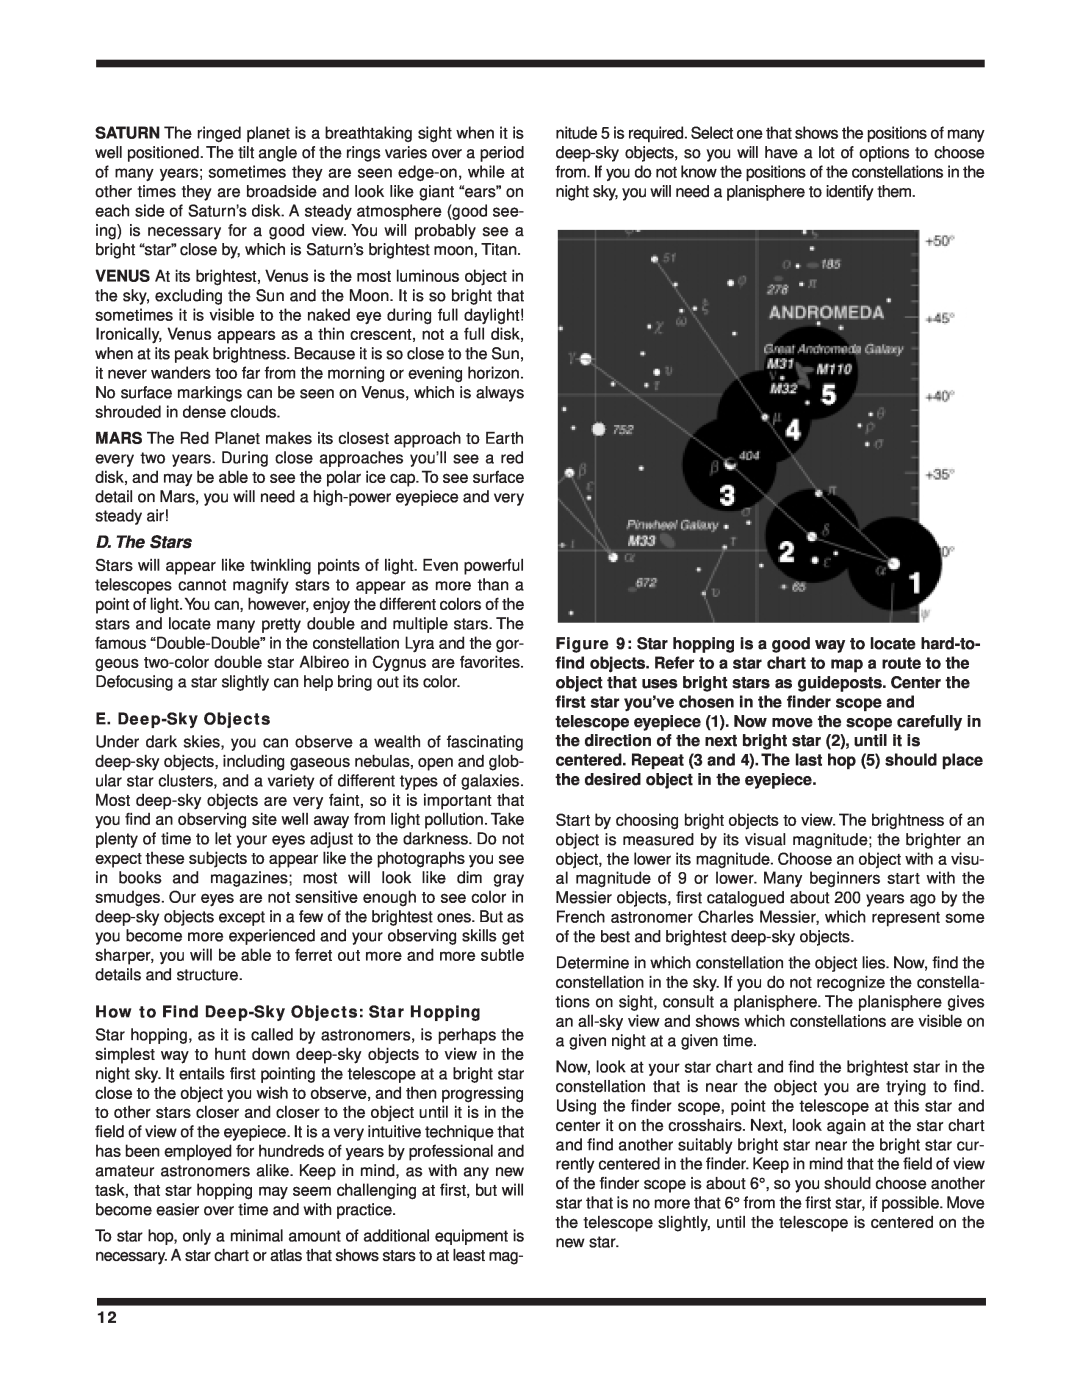 Orion 9824 instruction manual D. The Stars, E. Deep-Sky Objects, How to Find Deep-Sky Objects Star Hopping 